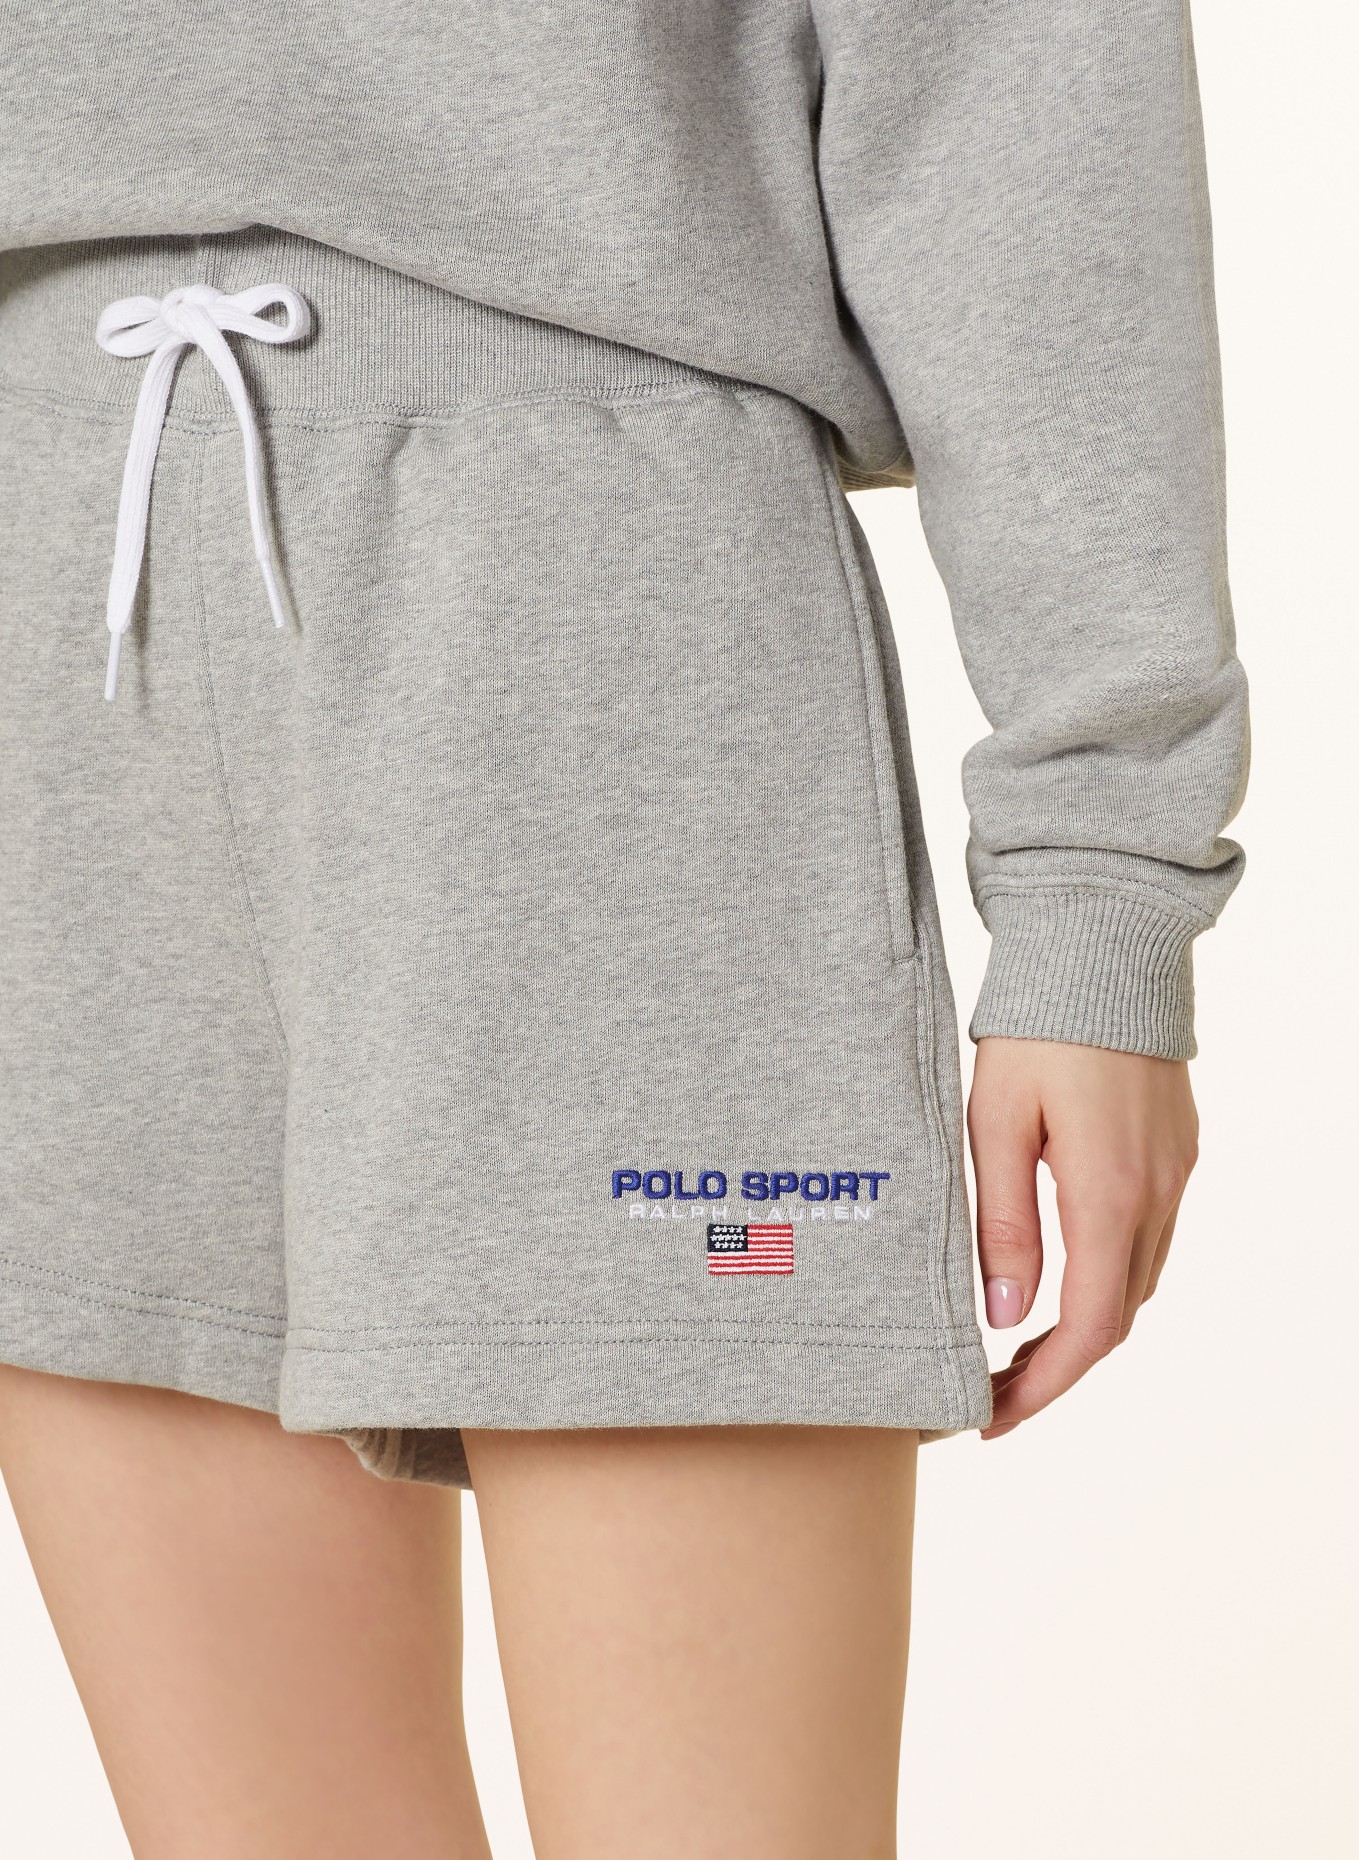 POLO SPORT Sweat shorts, Color: GRAY (Image 5)